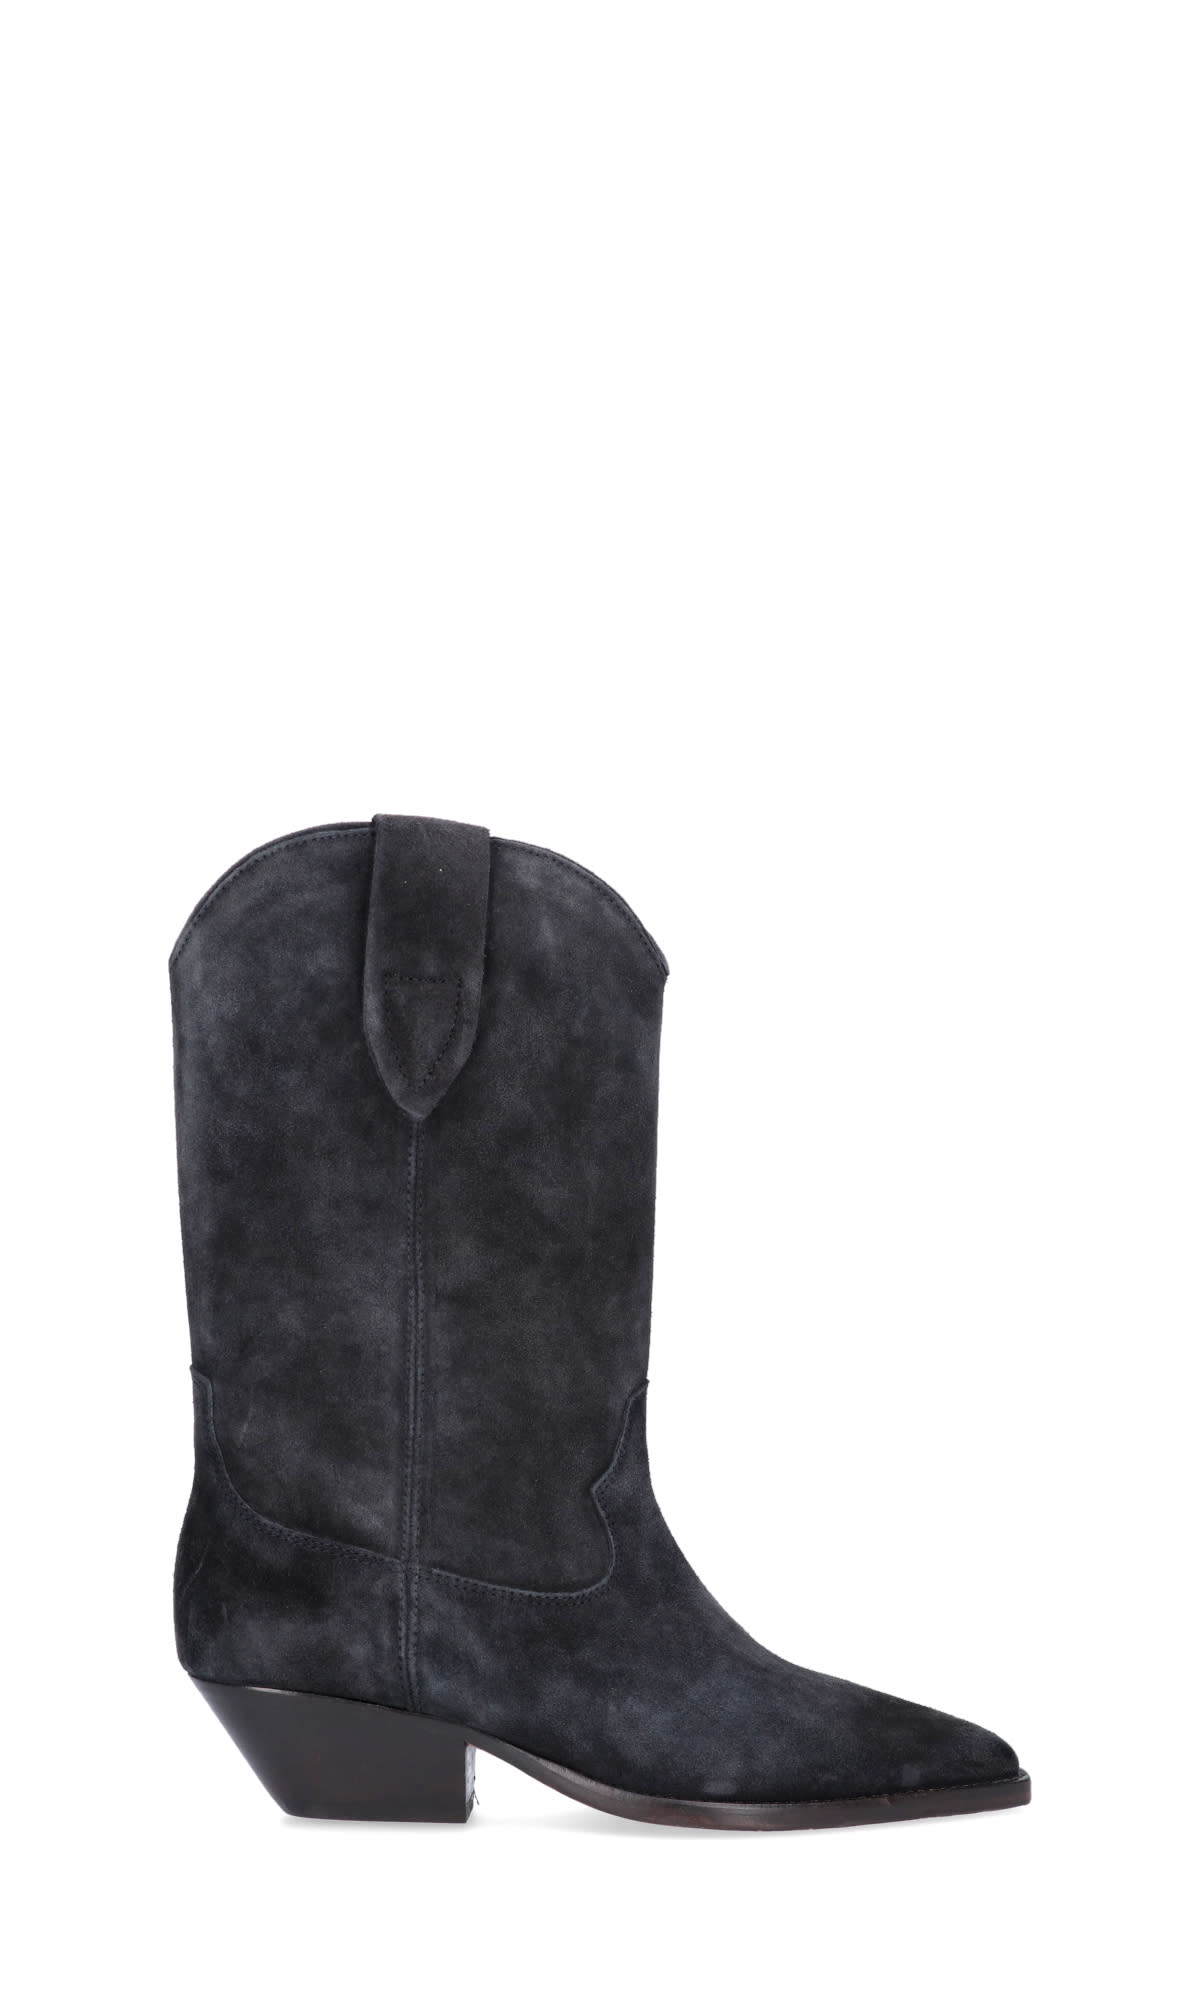 Buy Isabel Marant Boots online, shop Isabel Marant shoes with free shipping